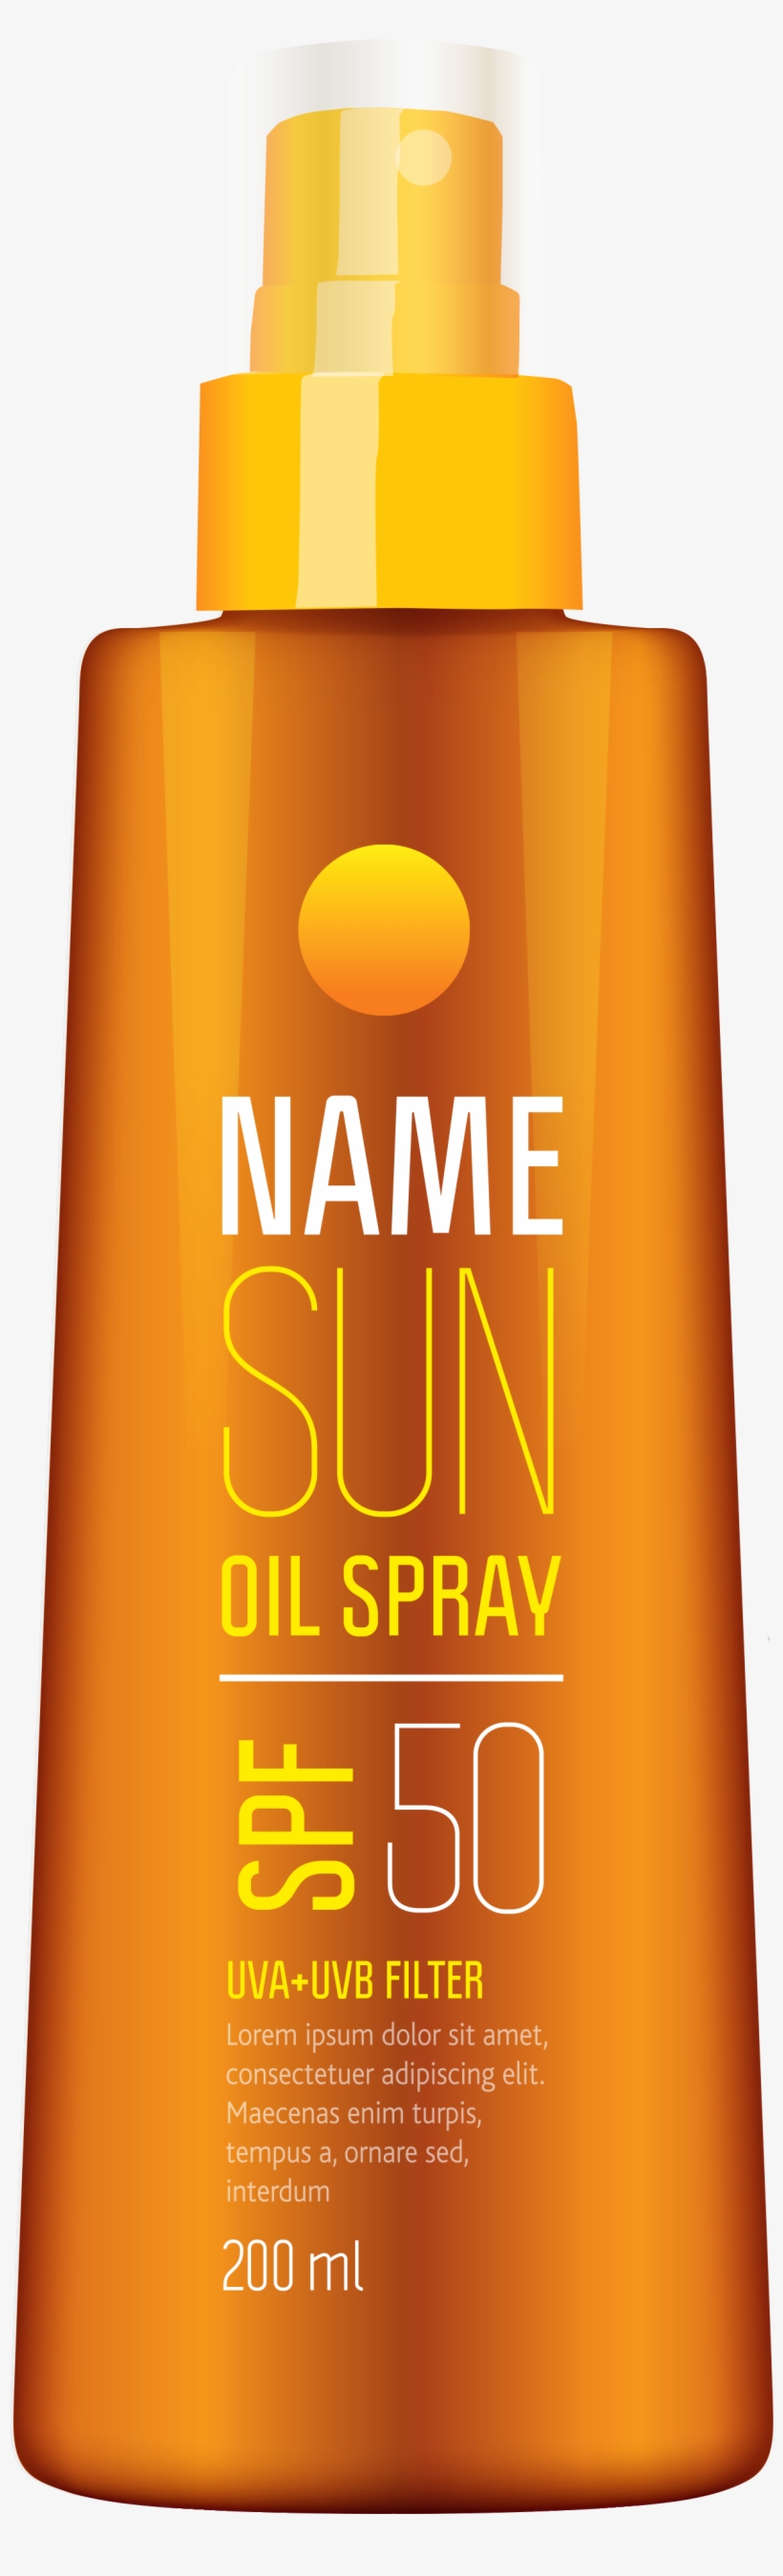 View Full Size - Sunscreen, transparent png #1690452